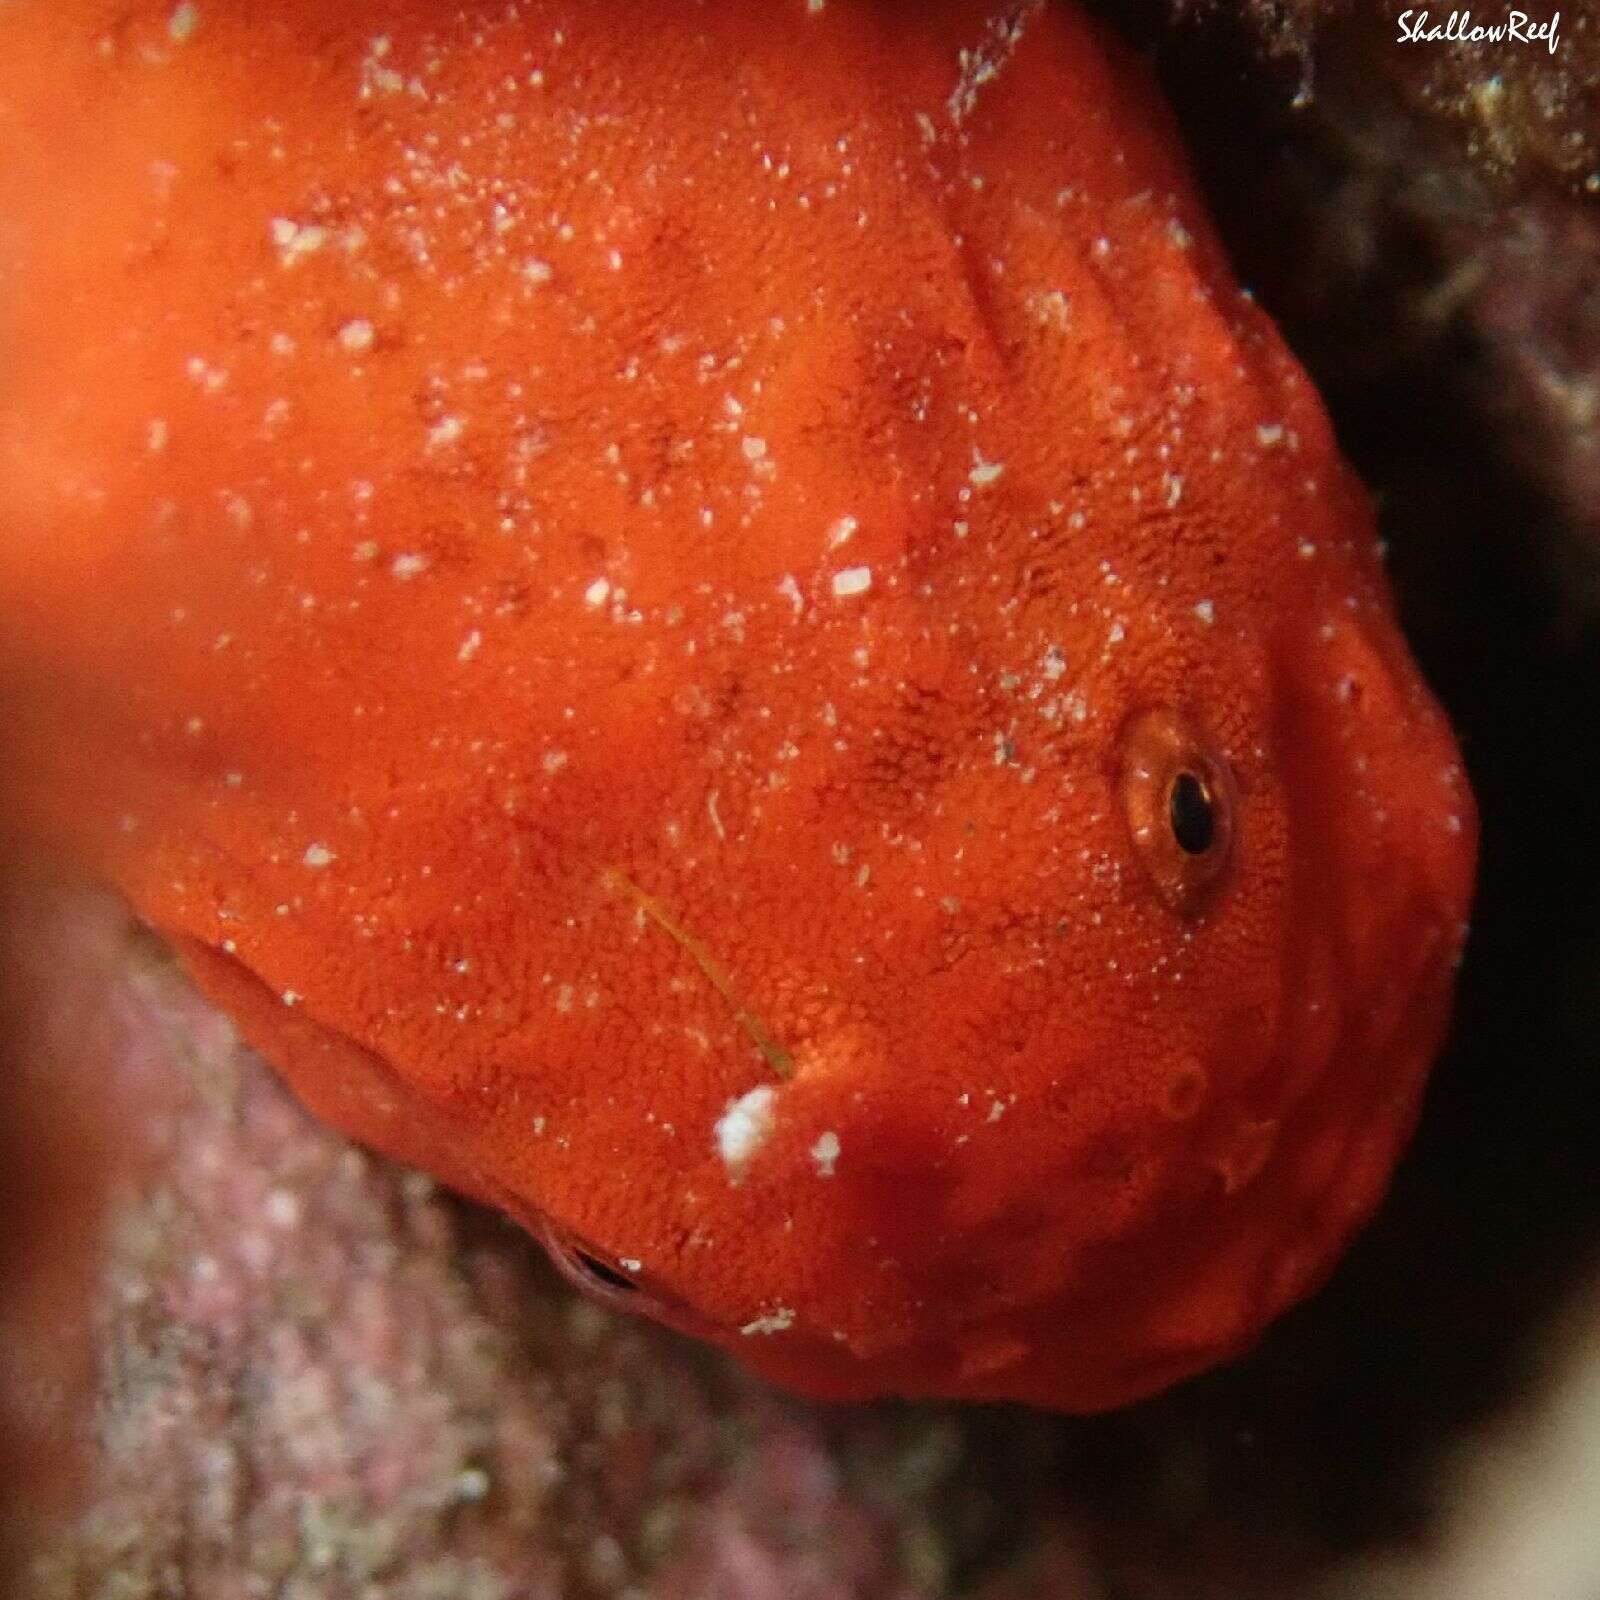 Image of Bandfin frogfish